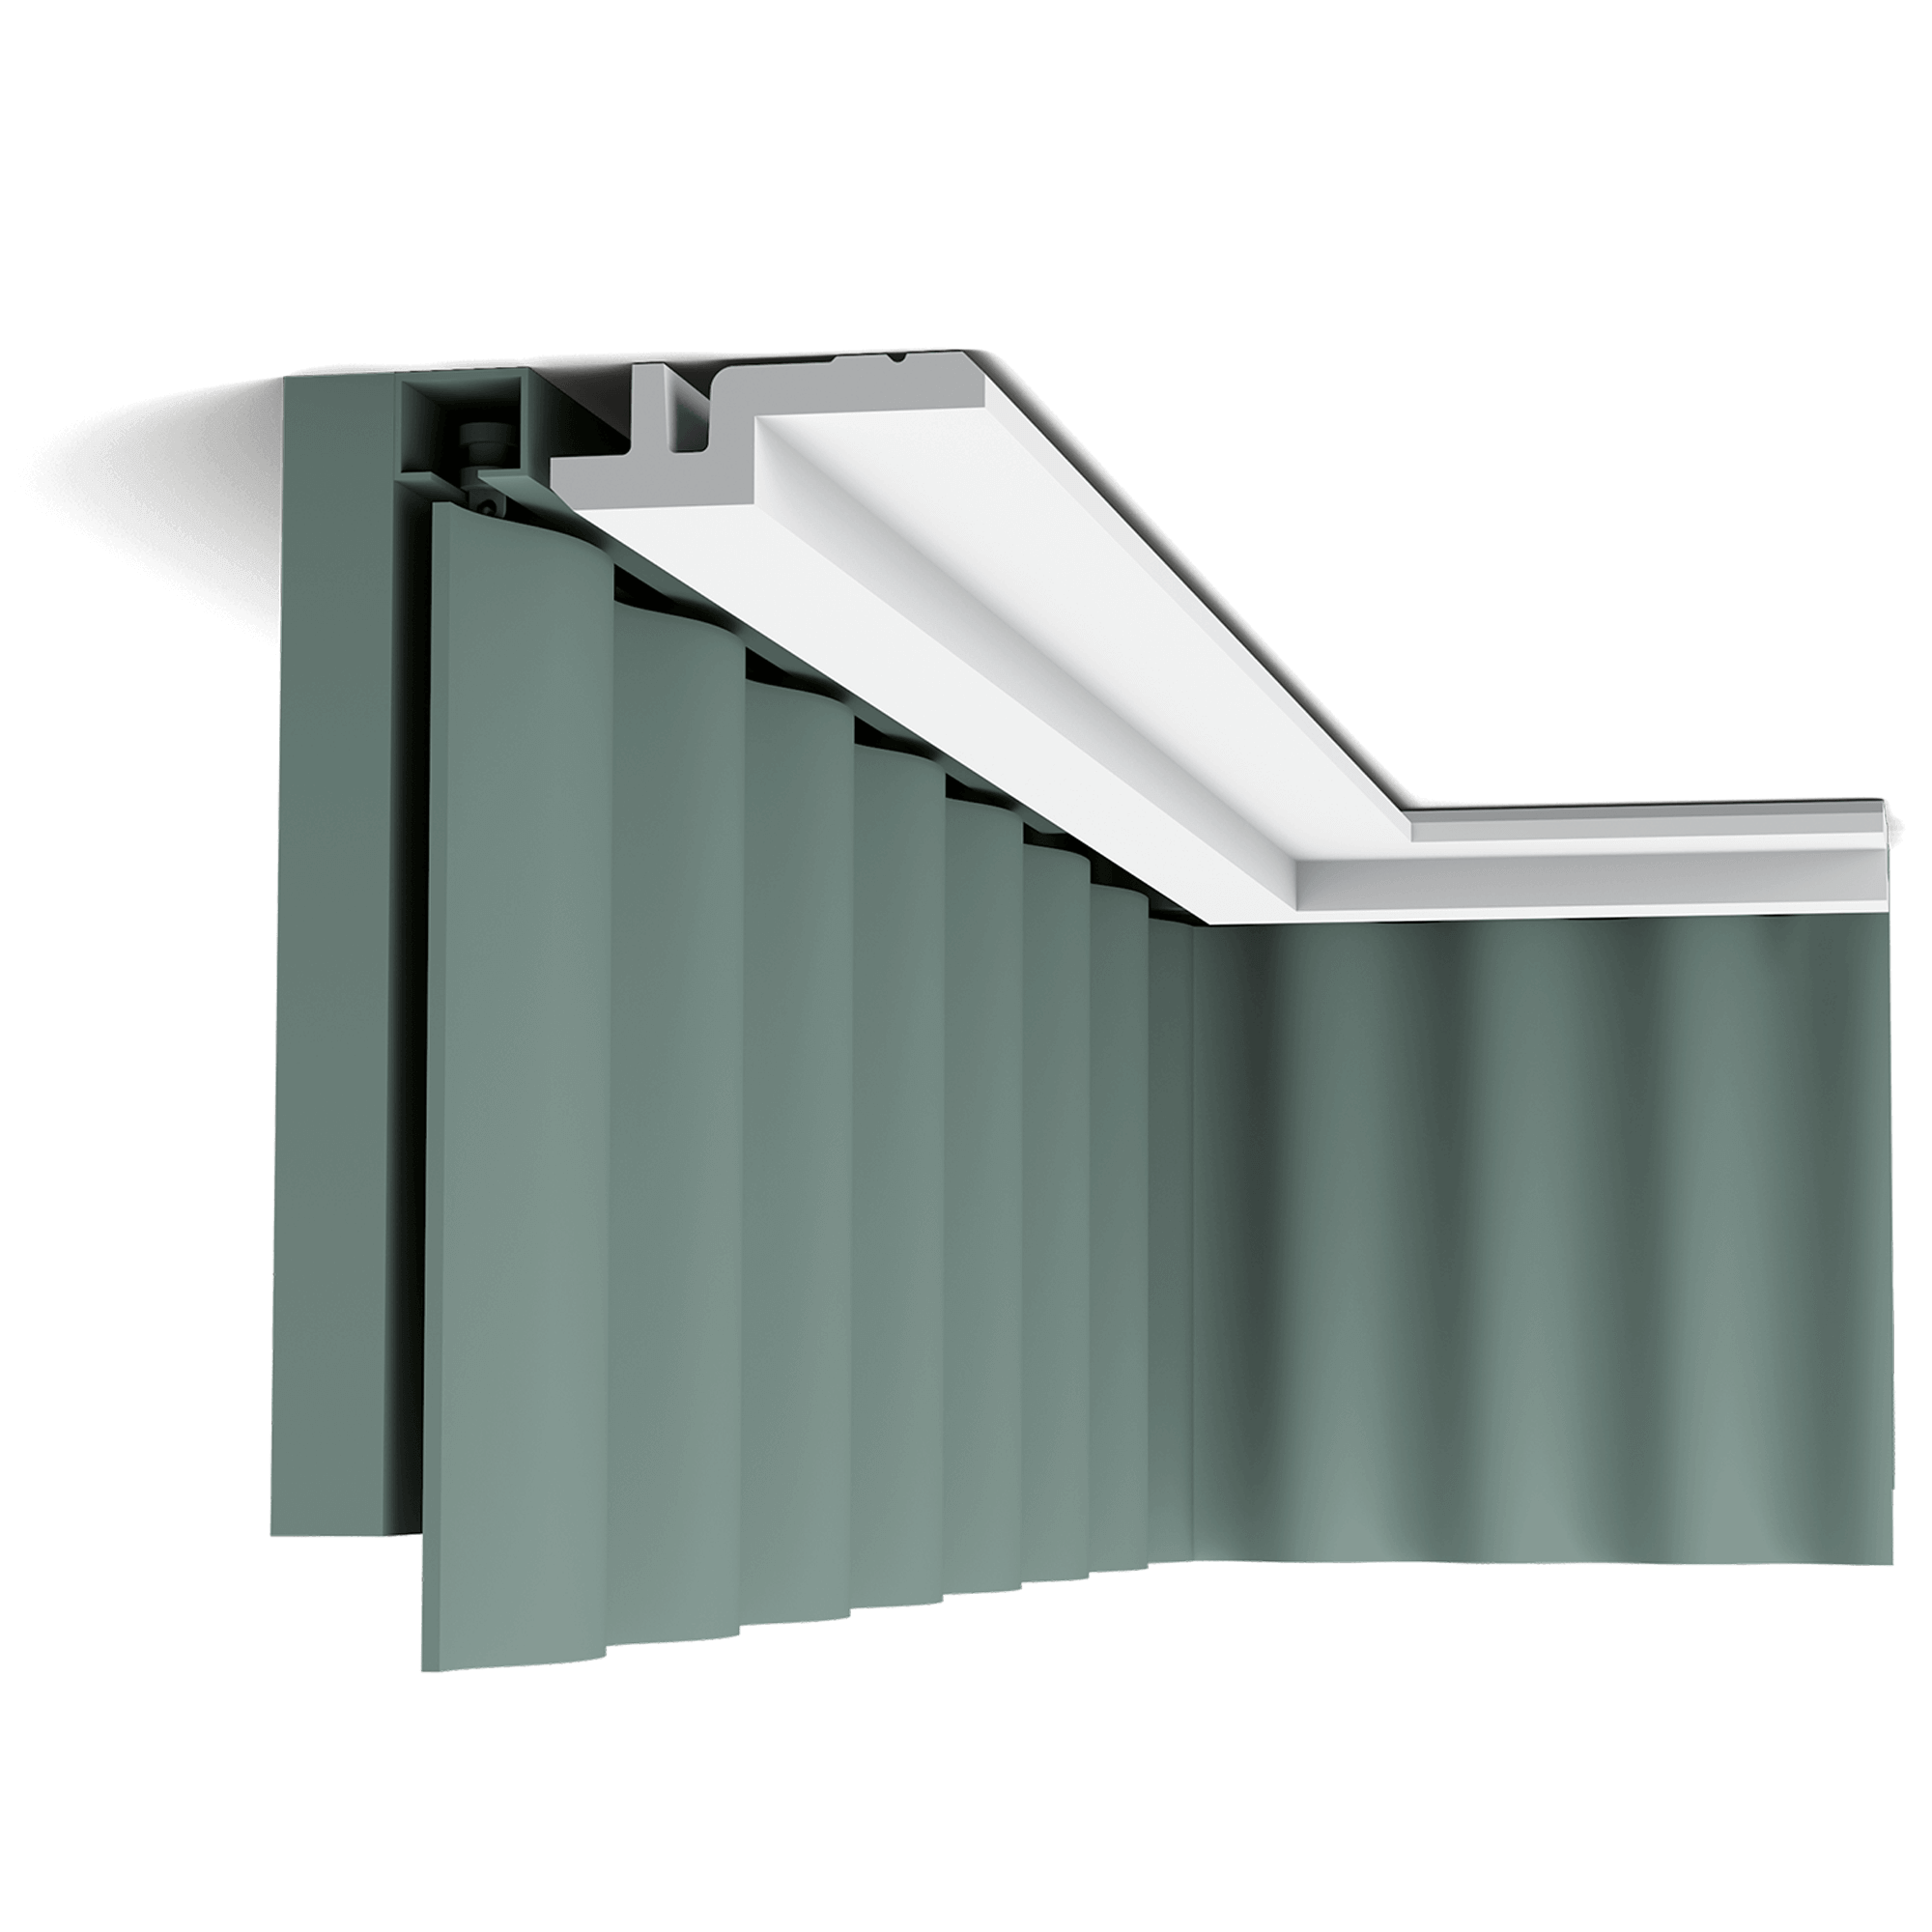 c394 curtain profile 2344 This clean, modern profile from the Steps range is also suitable as a curtain pelmet. This nicely conceals the curtain fixtures for a neat finish. Designed by Orio Tonini.